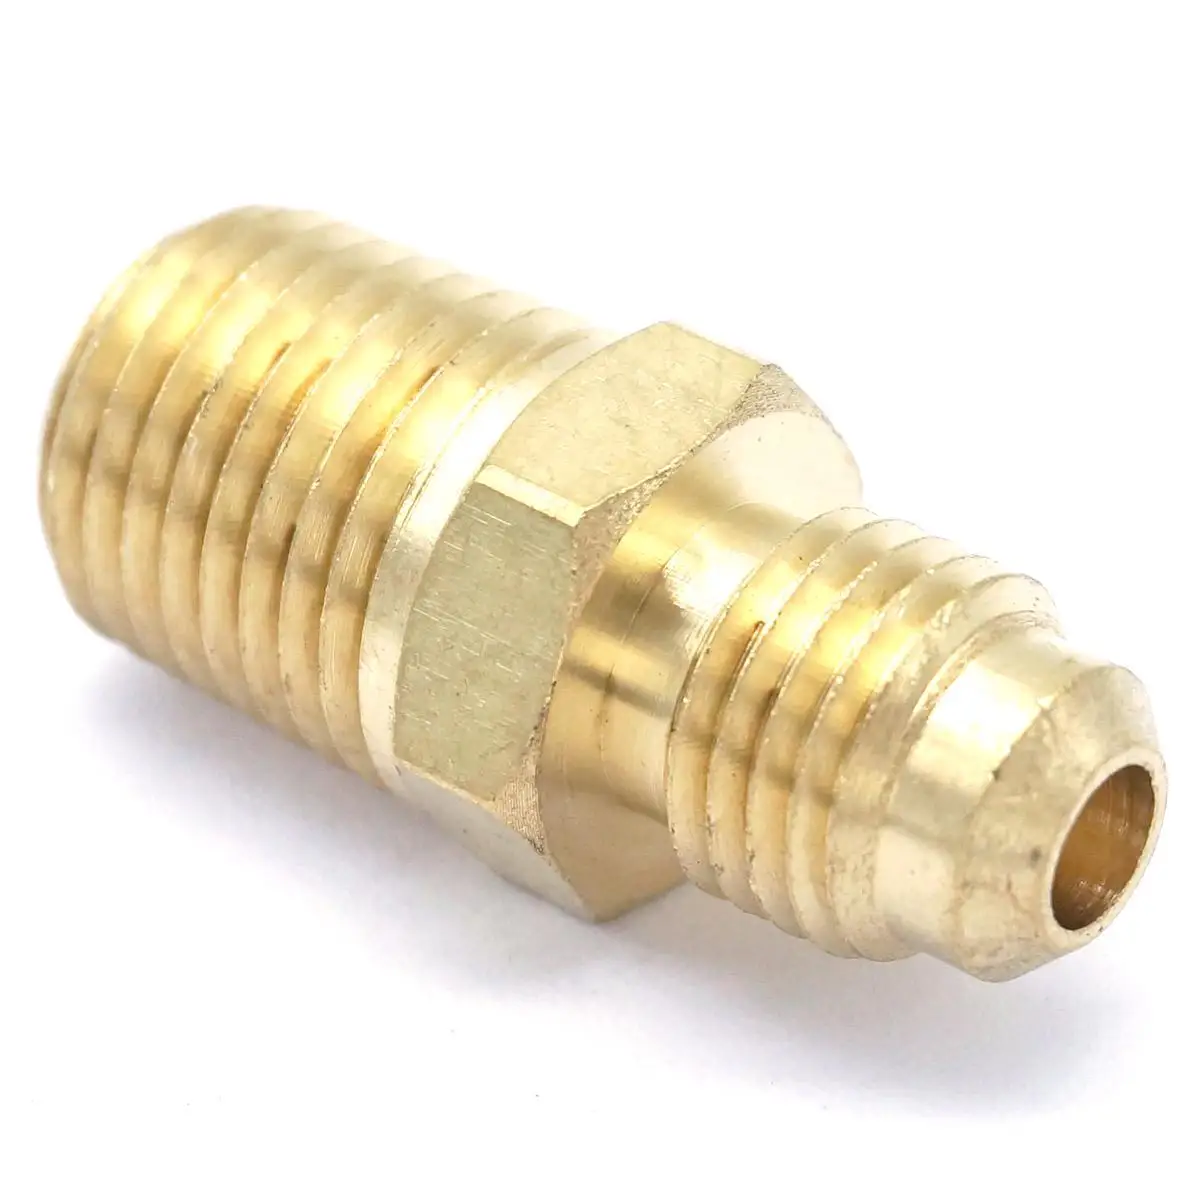 

SAE Thread 7/16"-20 UNF Fit Tube OD 1/4" - 1/4" NPT Male Brass SAE 45 Degree Pipe Fitting Adapters Connectors 1000PSI